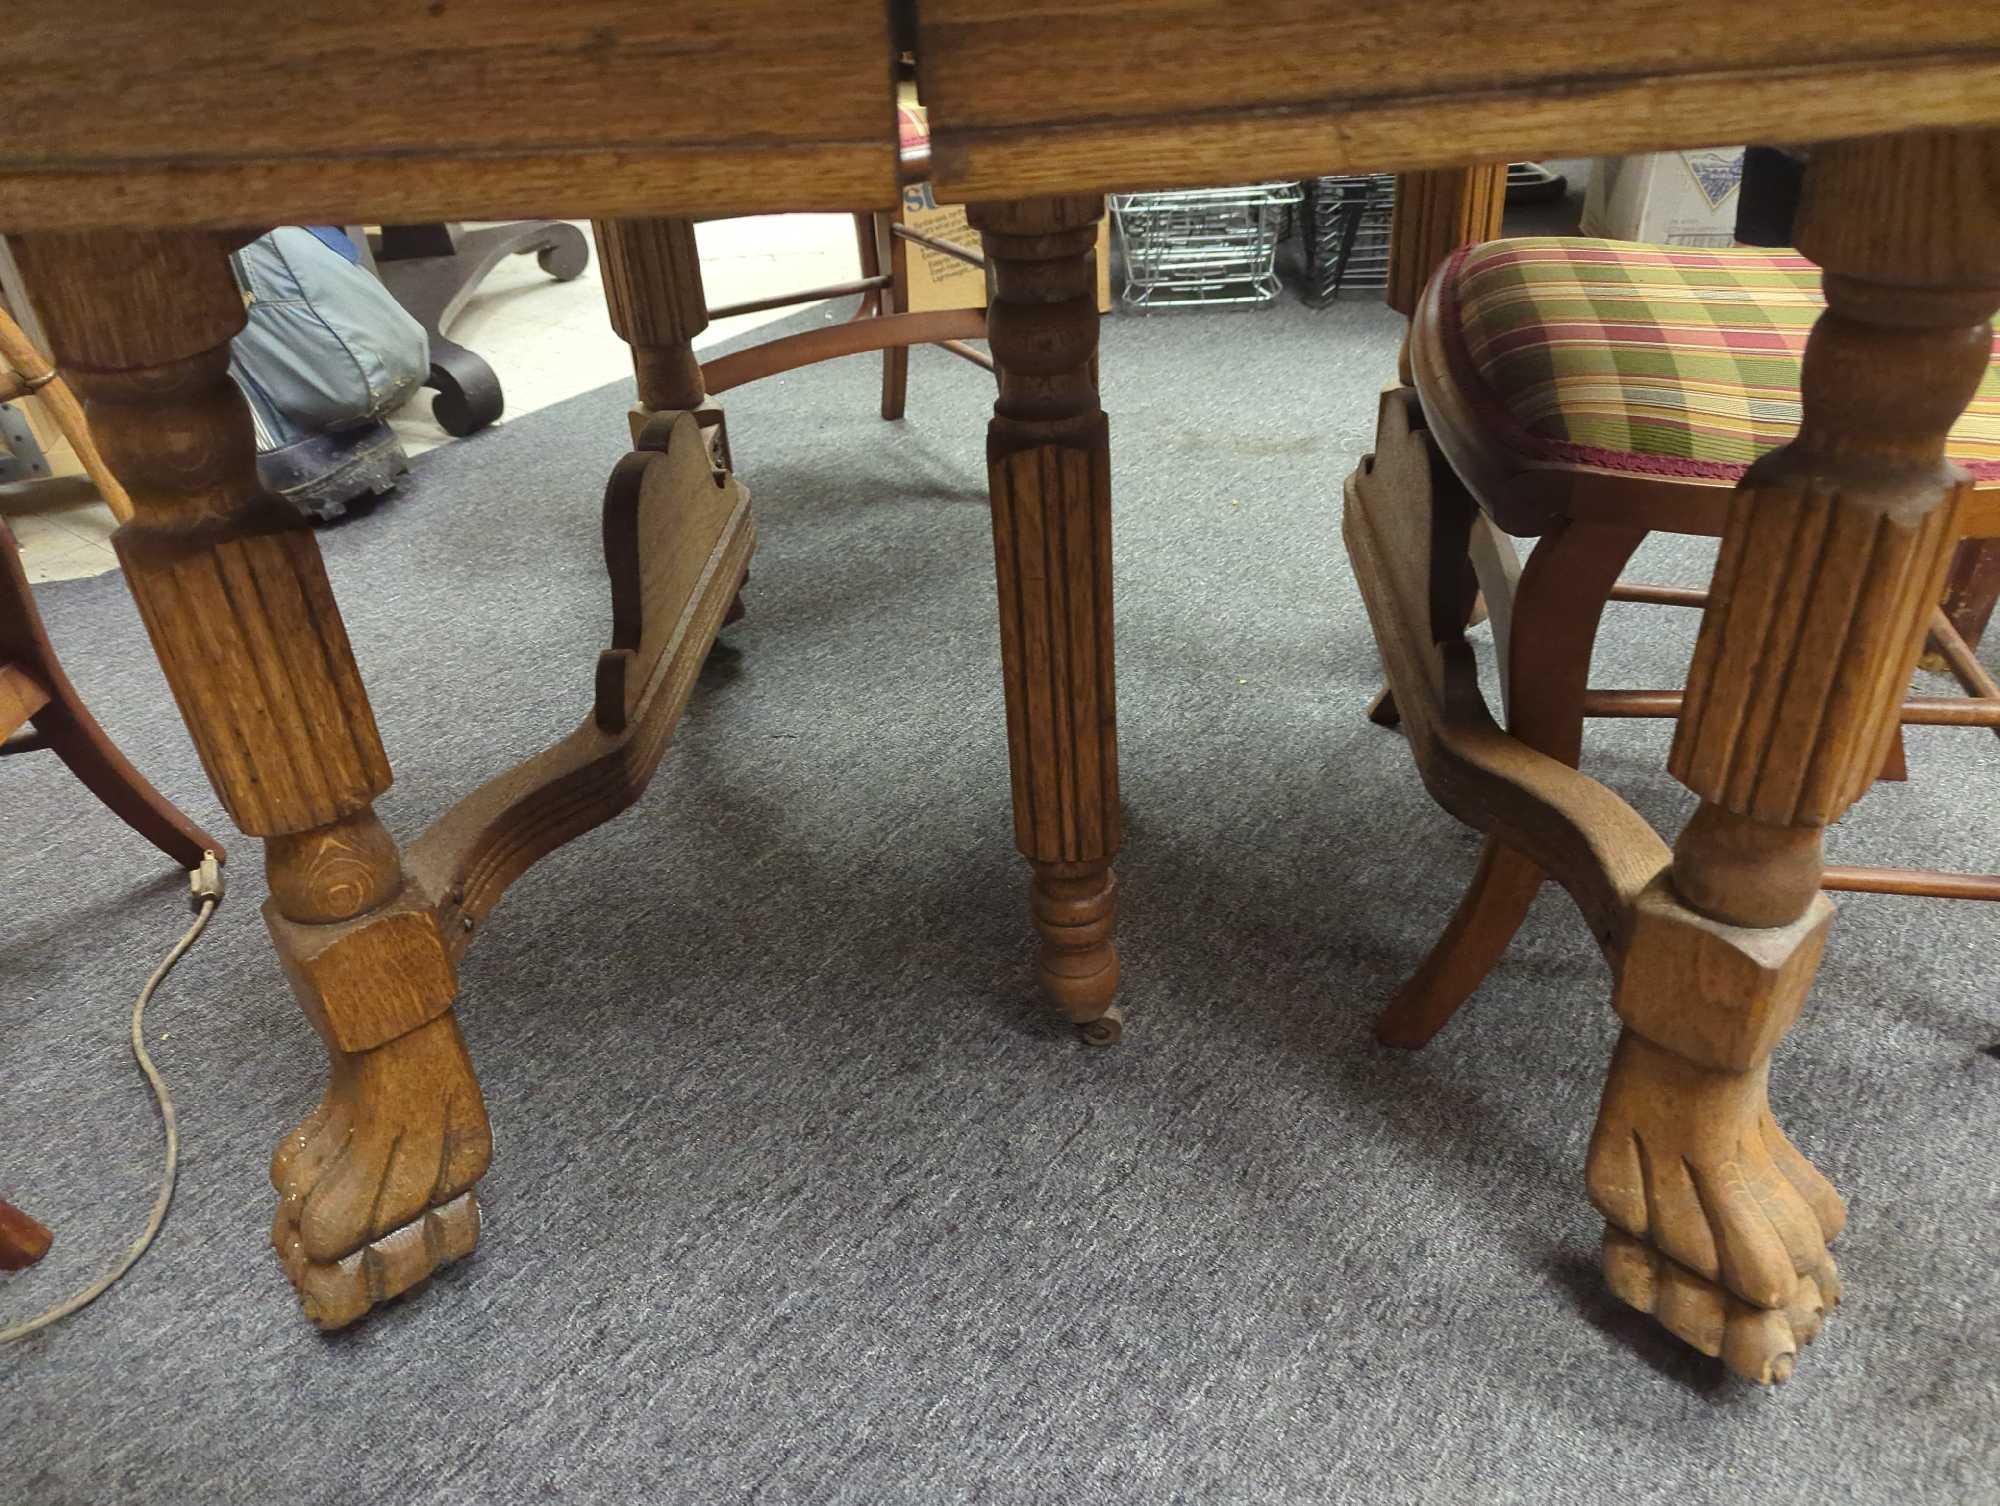 1910s American Square Oak Dining Table With Claw Feet, Come With 2 Leaves, Measure Approximately 41